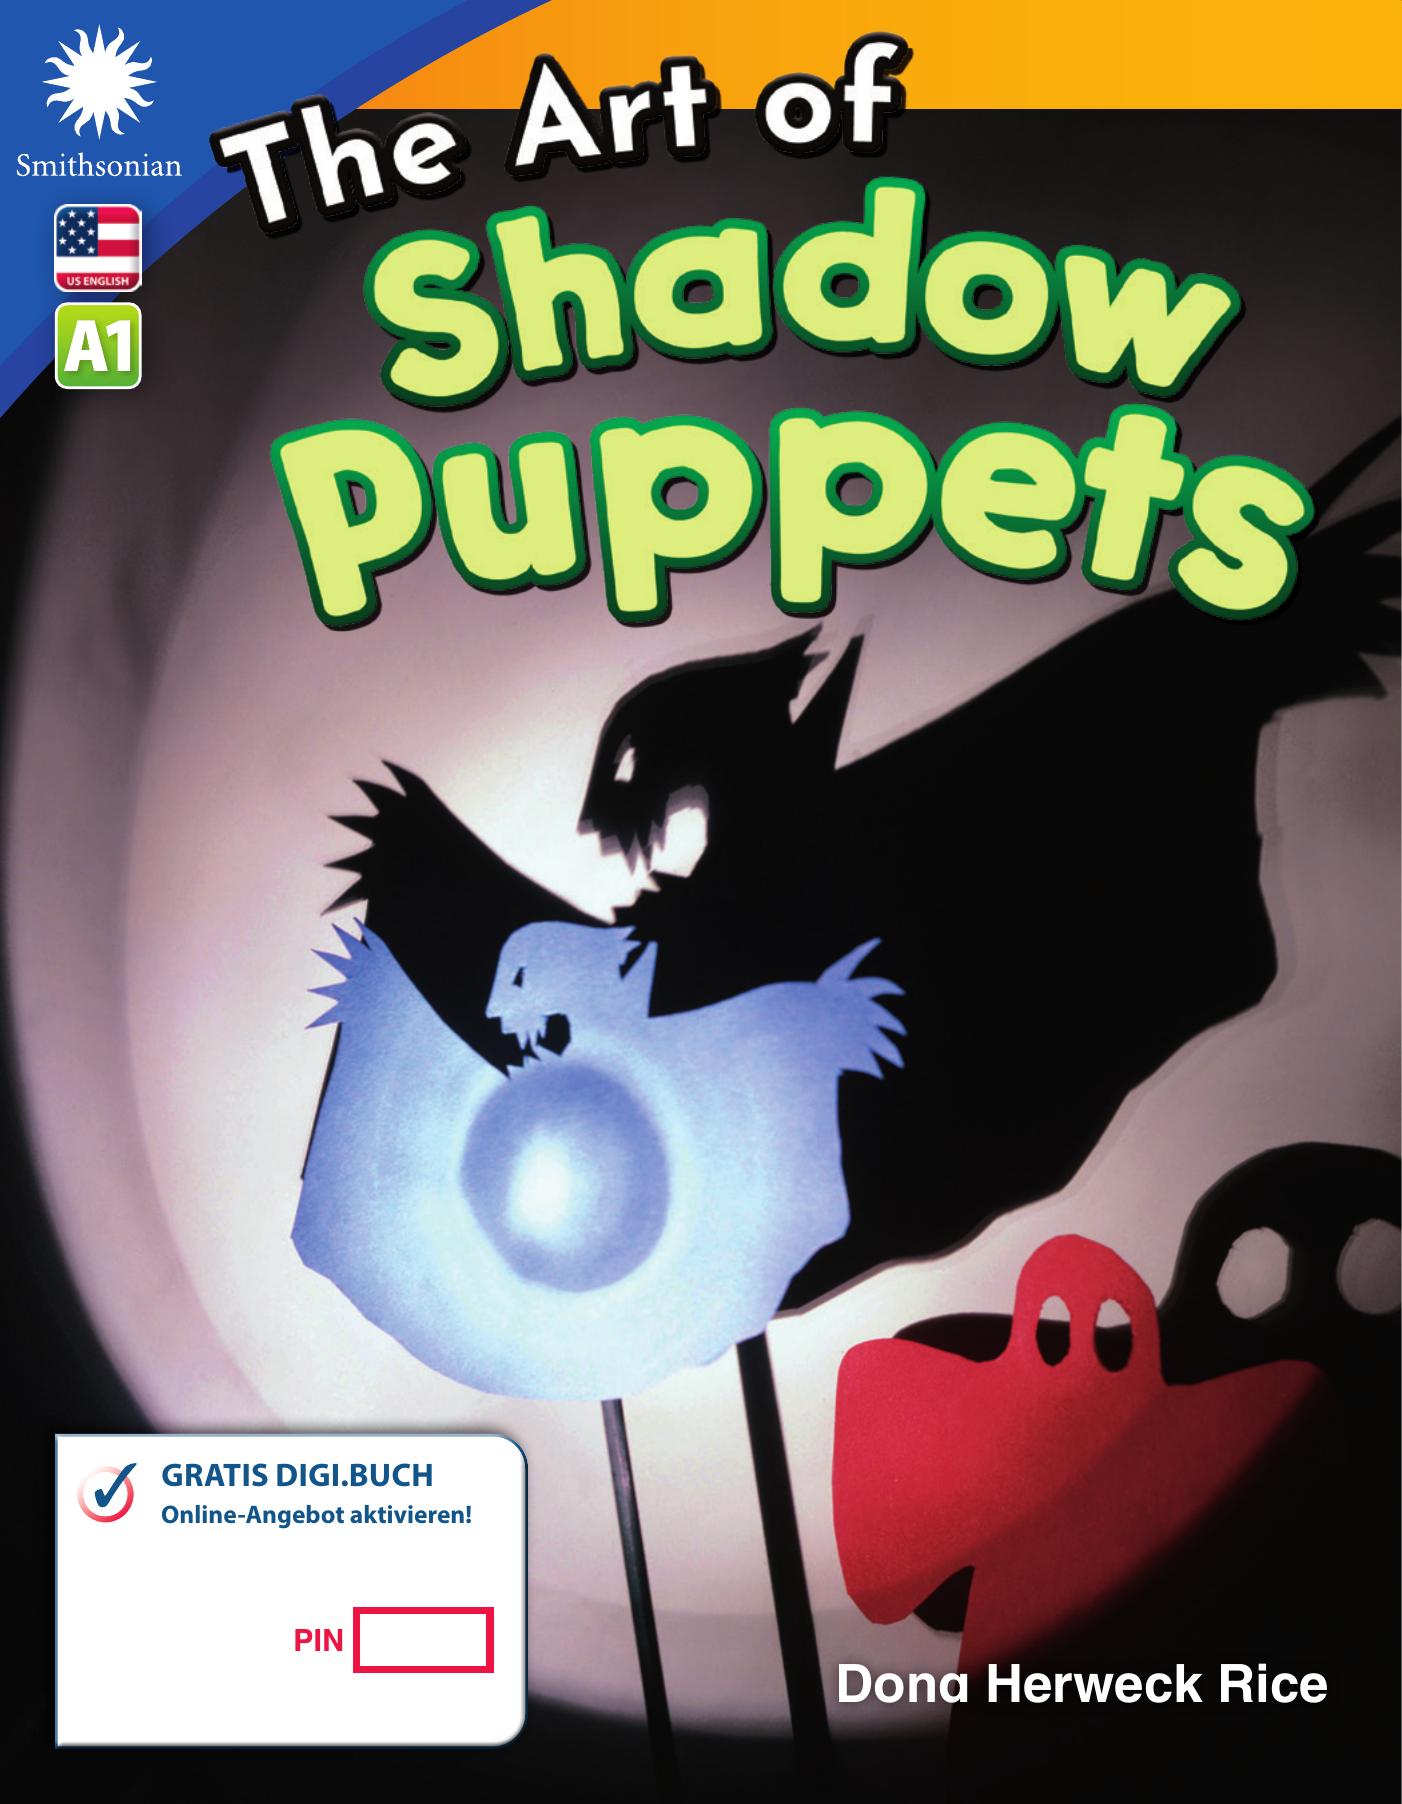 A1 – The Art of Shadow Puppets